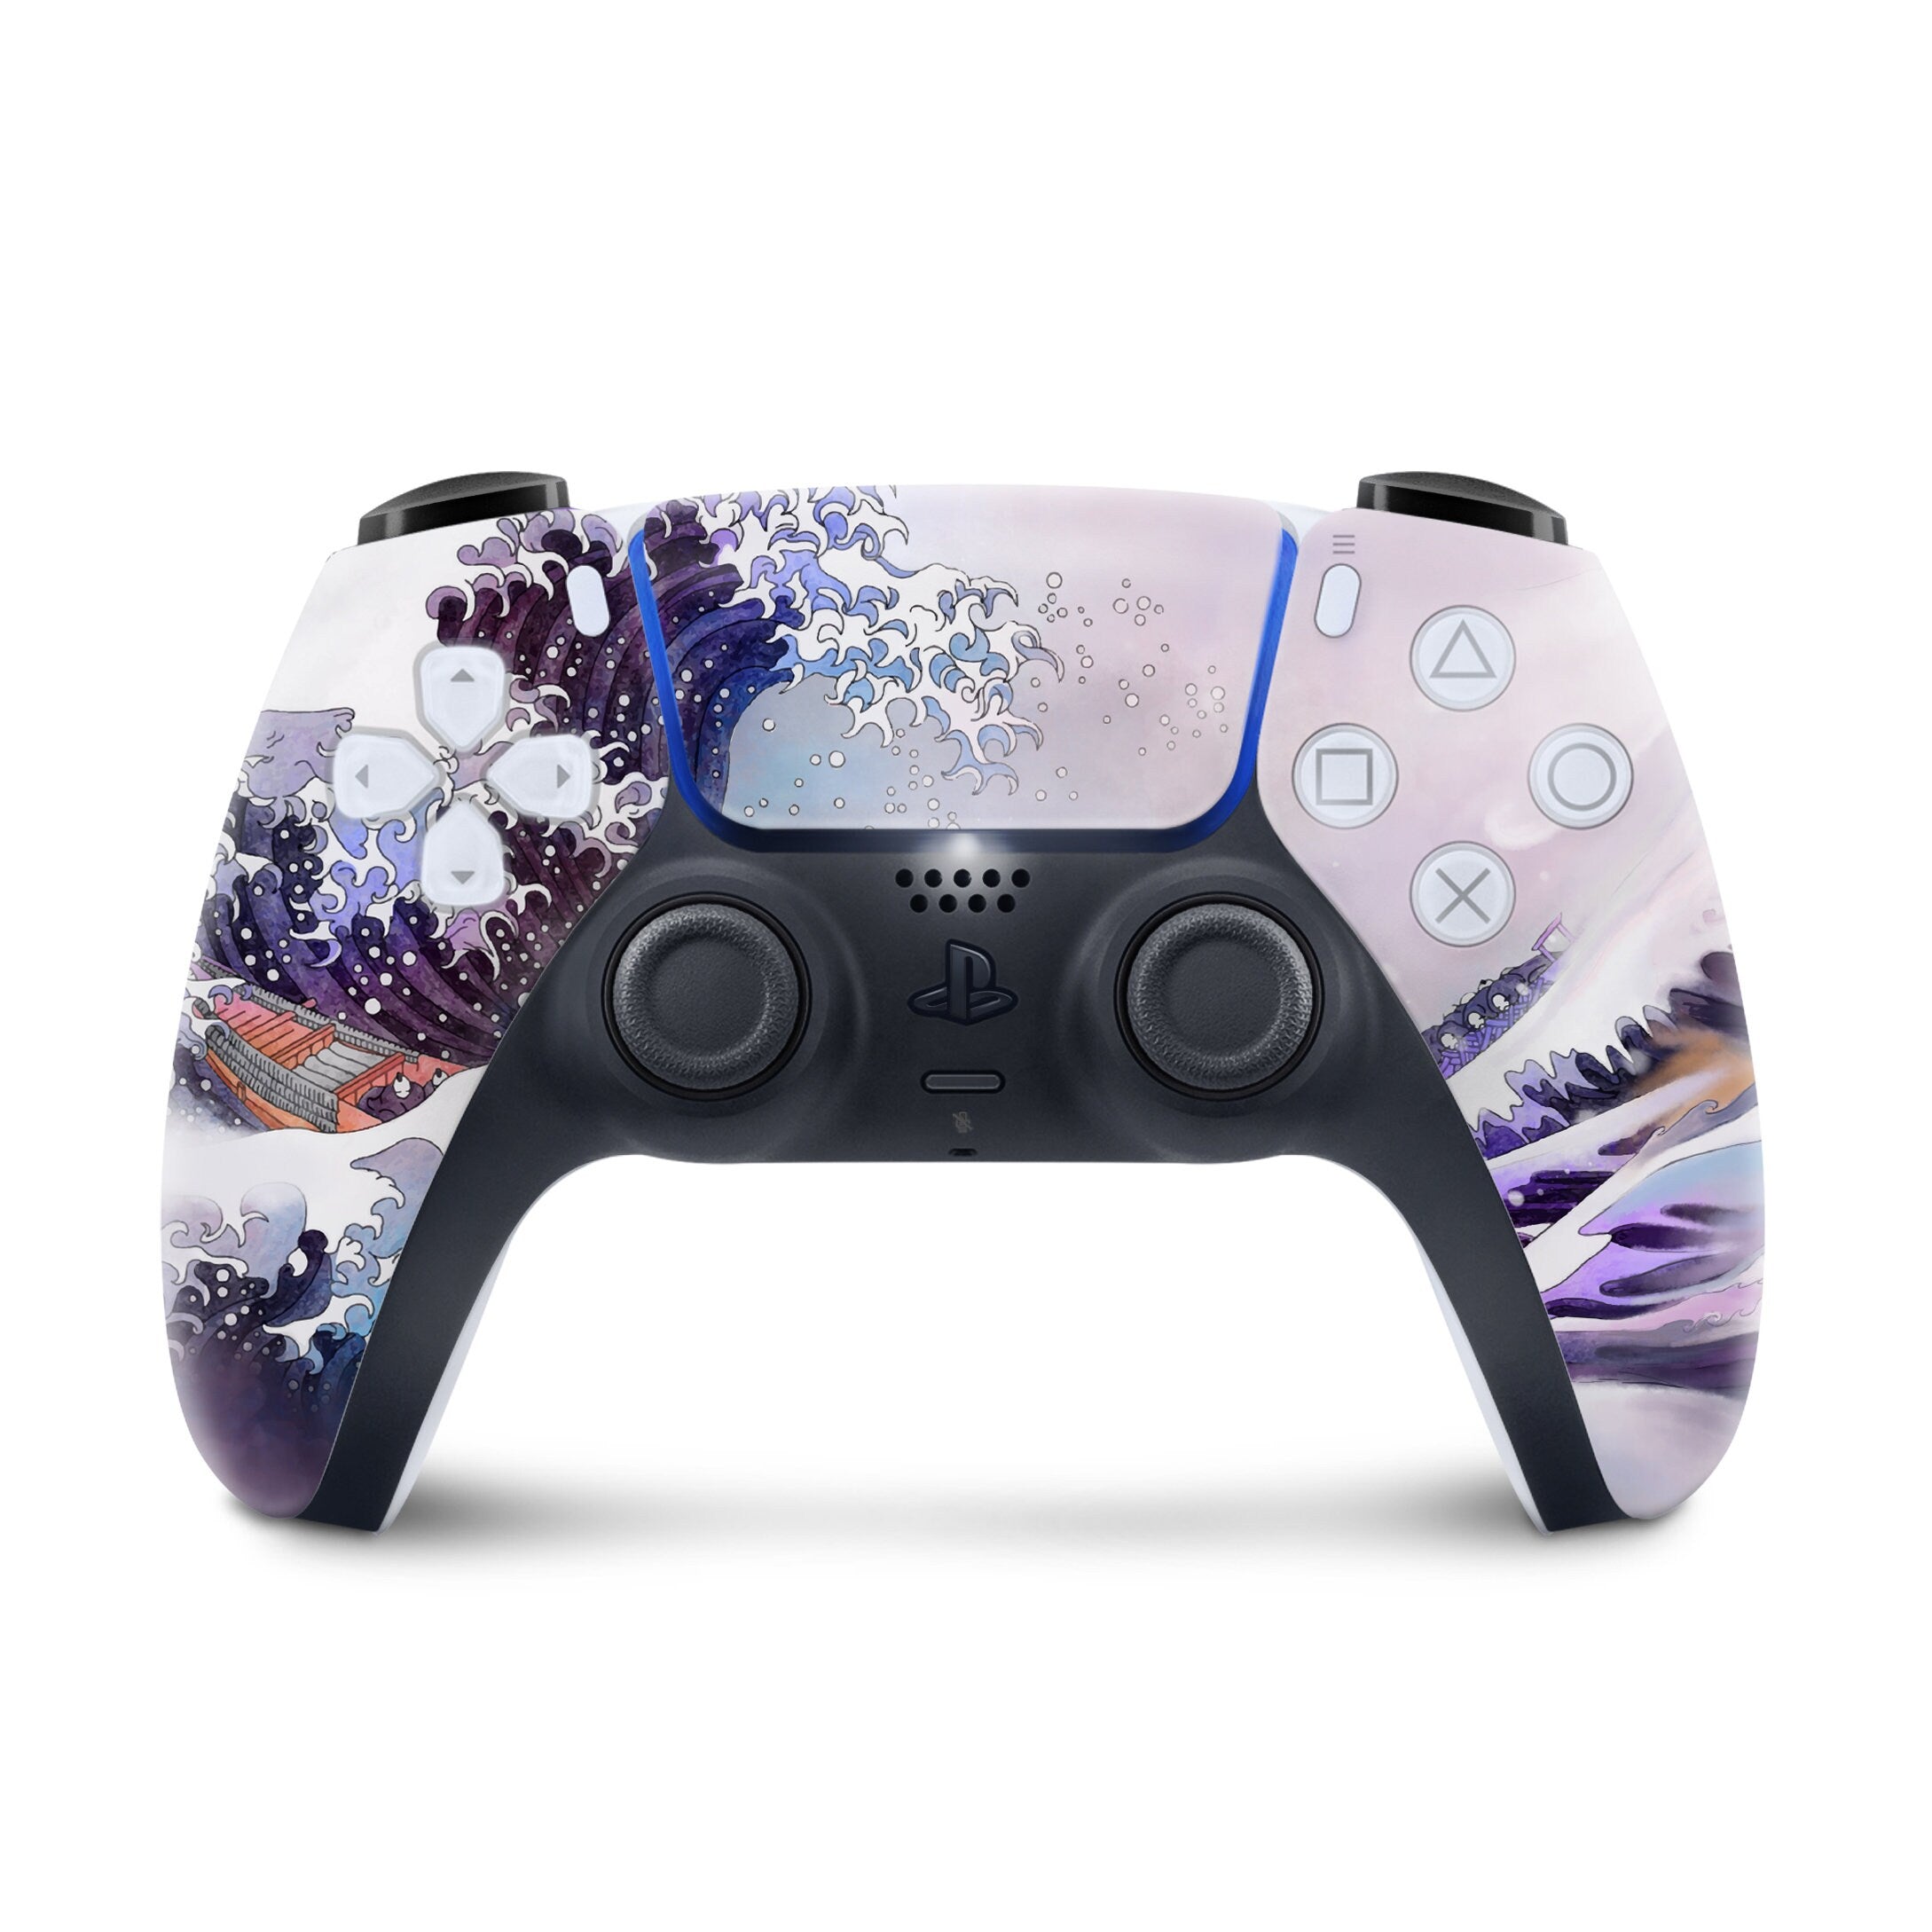 PS4 Controller Skin Sticker Decal Vinyl Wrap Cover for PlayStation